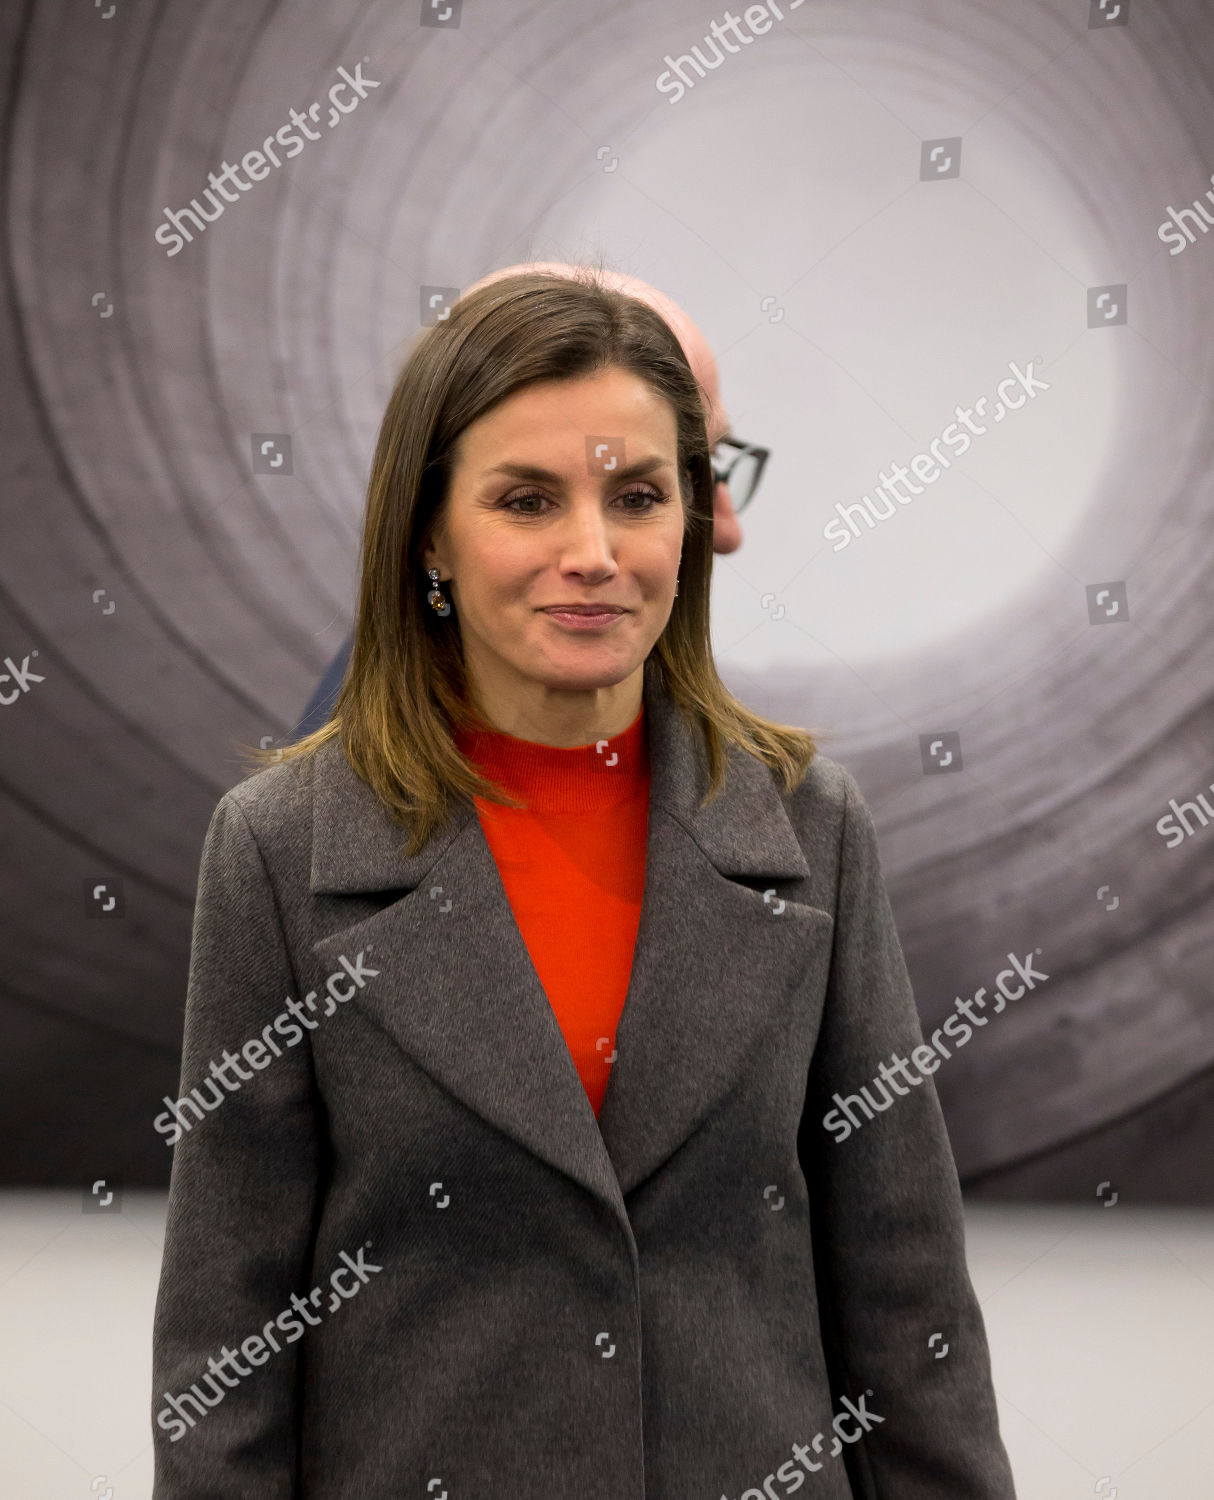 foundation-for-help-against-drug-addiction-board-meeting-madrid-spain-shutterstock-editorial-10031489a.jpg